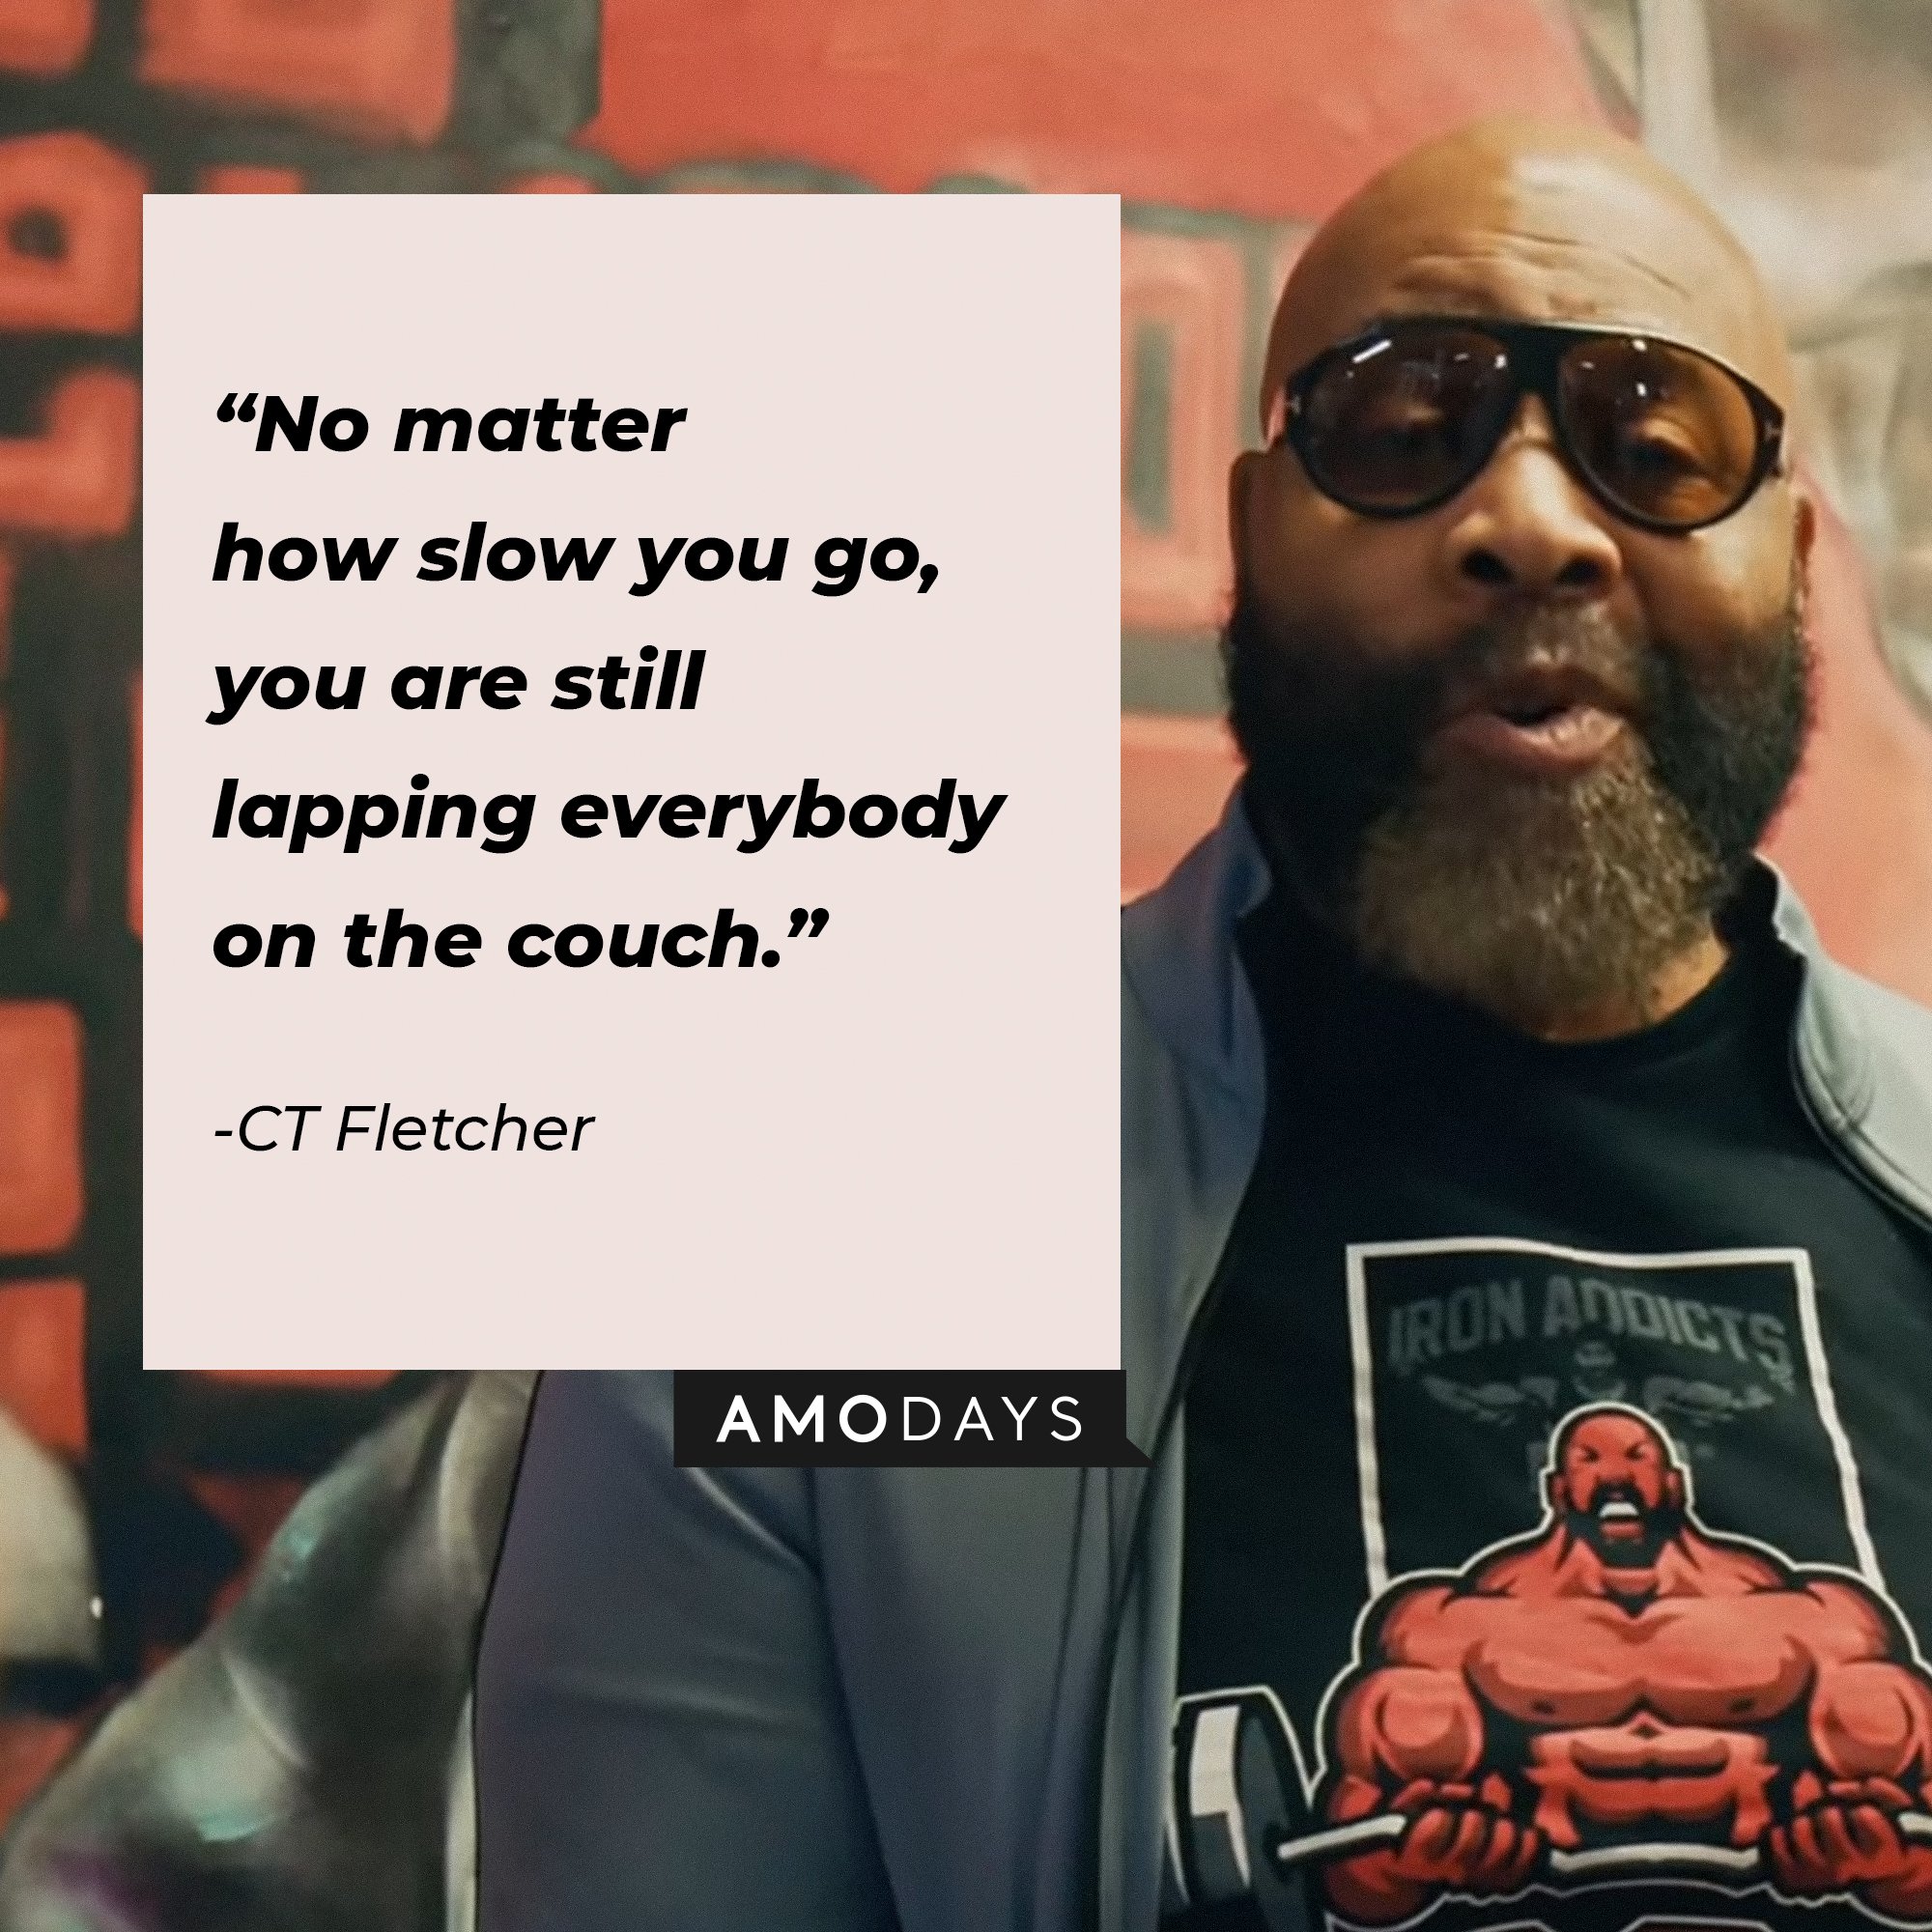 CT Fletcher's quote:\\\\\\\\u00a0"No matter how slow you go, you are still lapping everybody on the couch."\\\\\\\\u00a0| Image: AmoDays